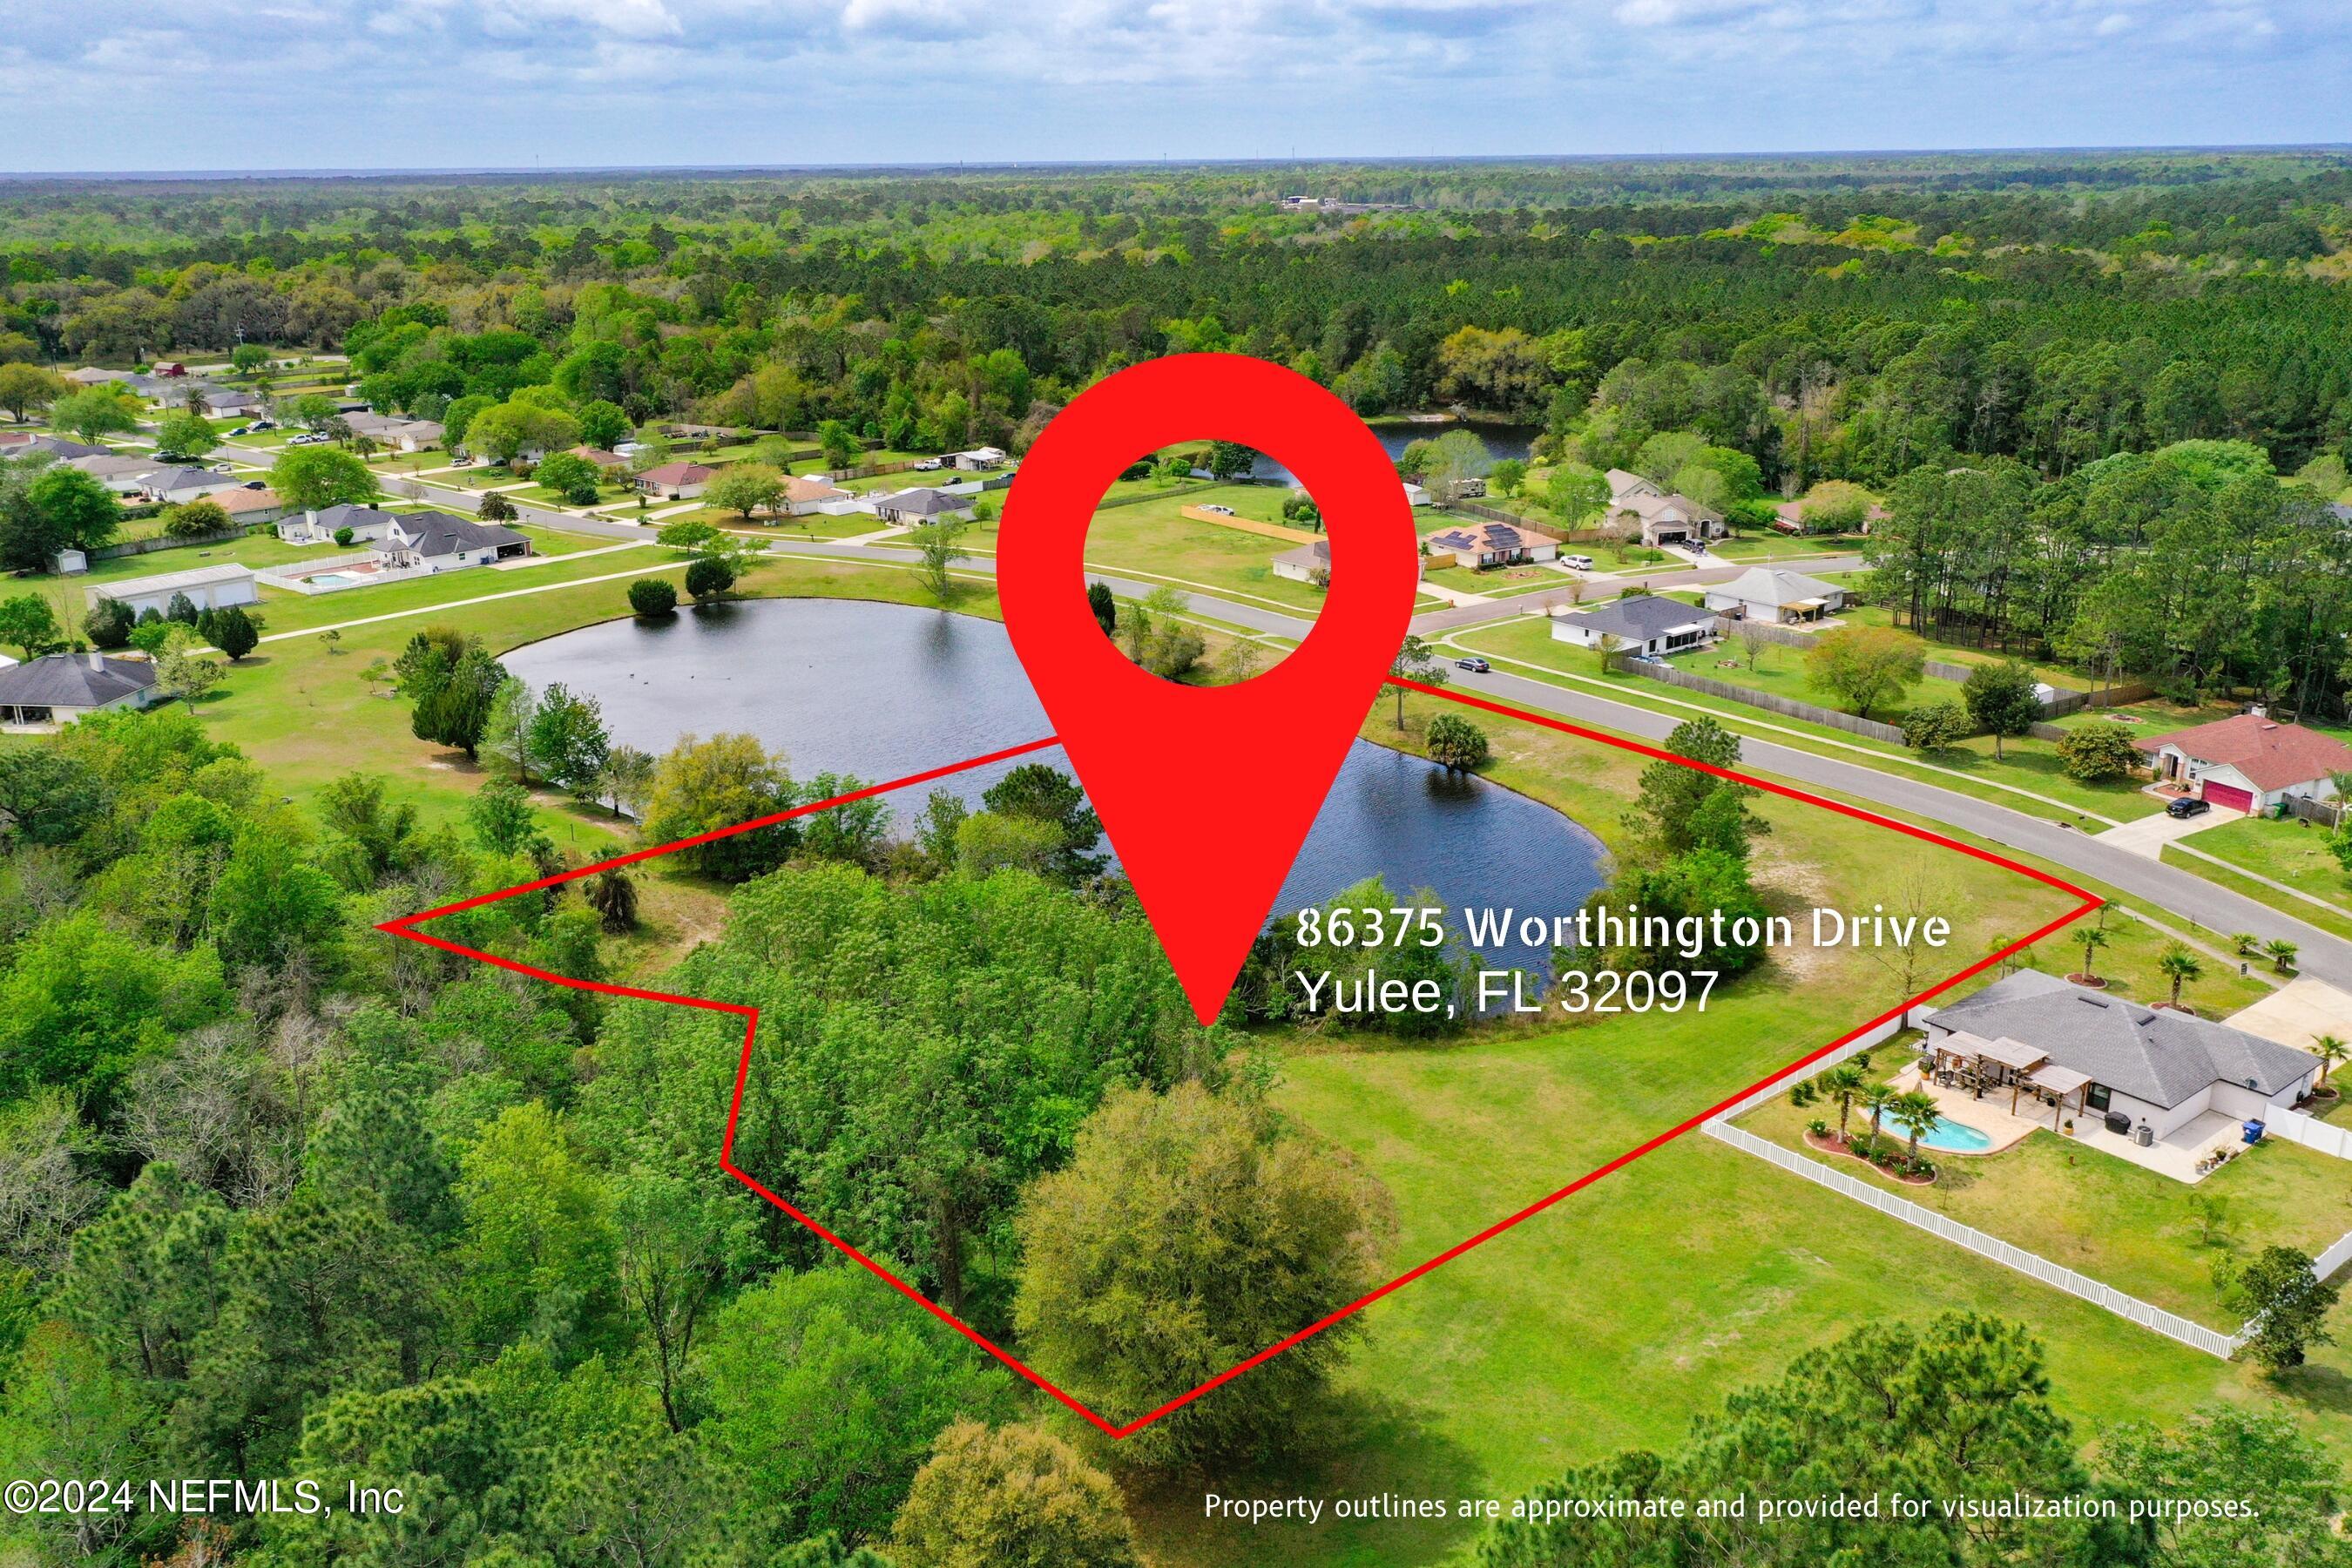 Yulee, FL home for sale located at 86375 Worthington Drive, Yulee, FL 32097